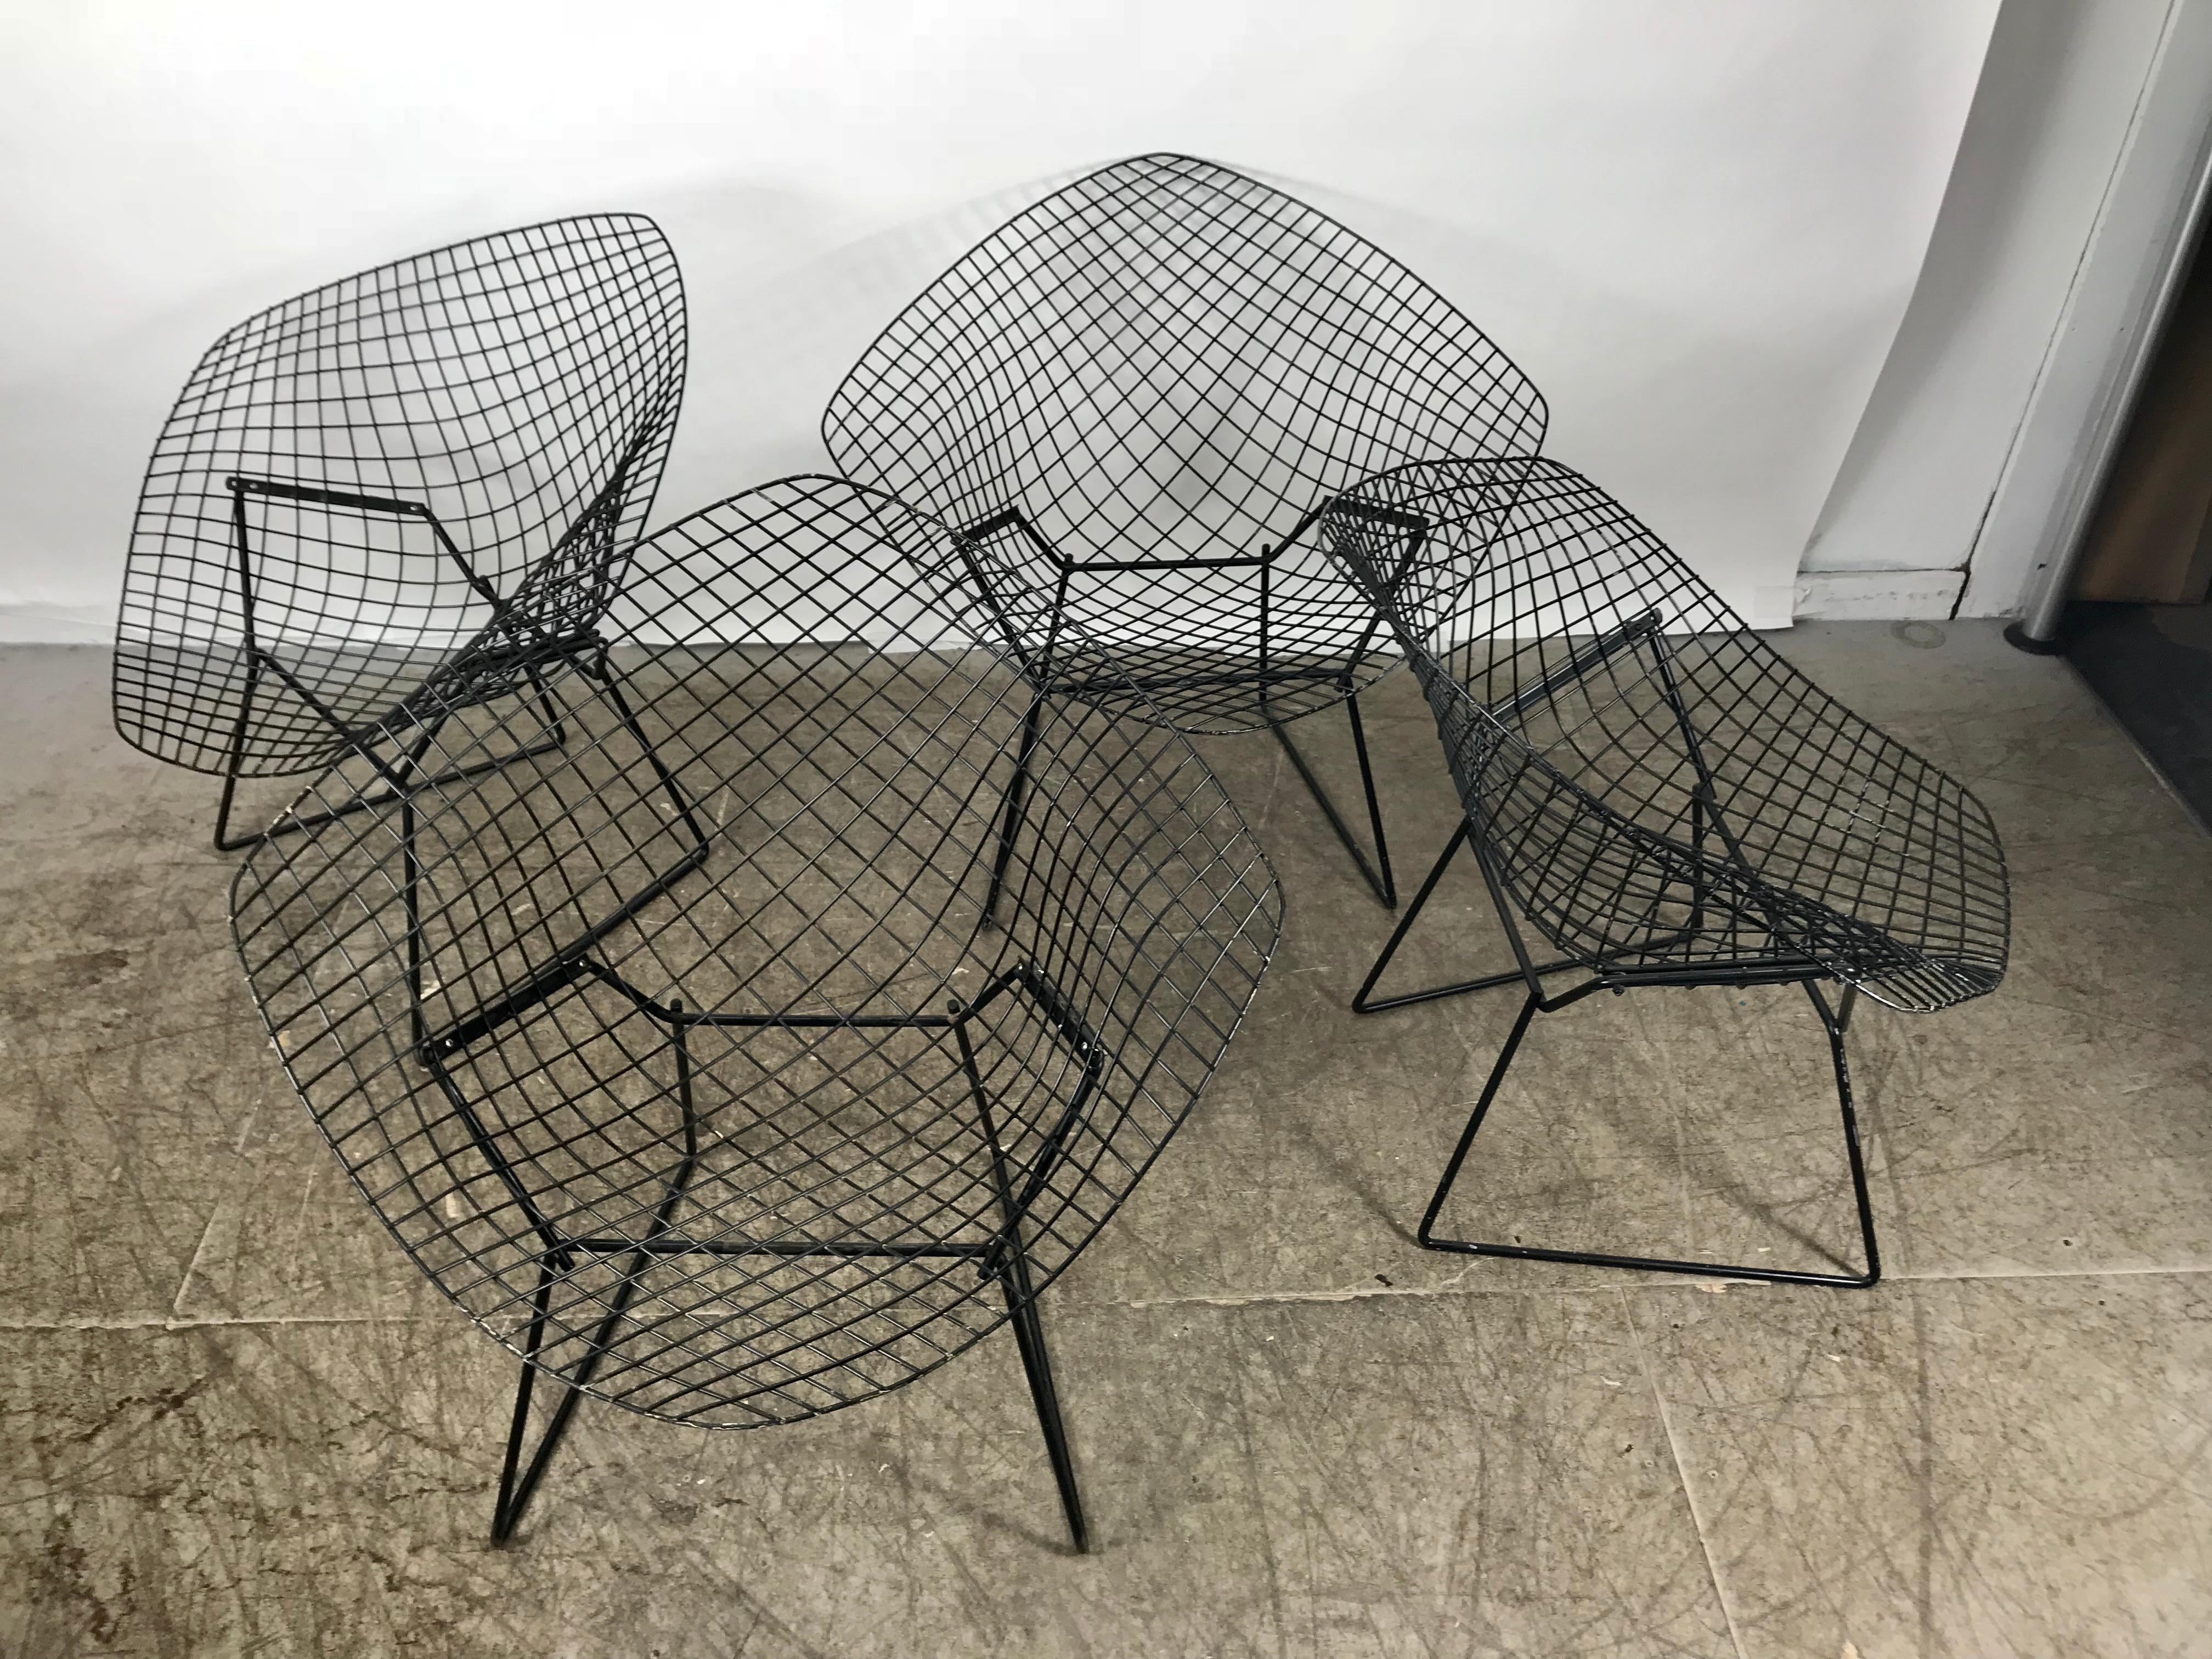 Matched set of 4 midcentury Bertoia diamond chairs, Knoll, classic indoor or outdoor diamond chairs designed by Harry Bertoia manufactured by Knoll, nice original condition.